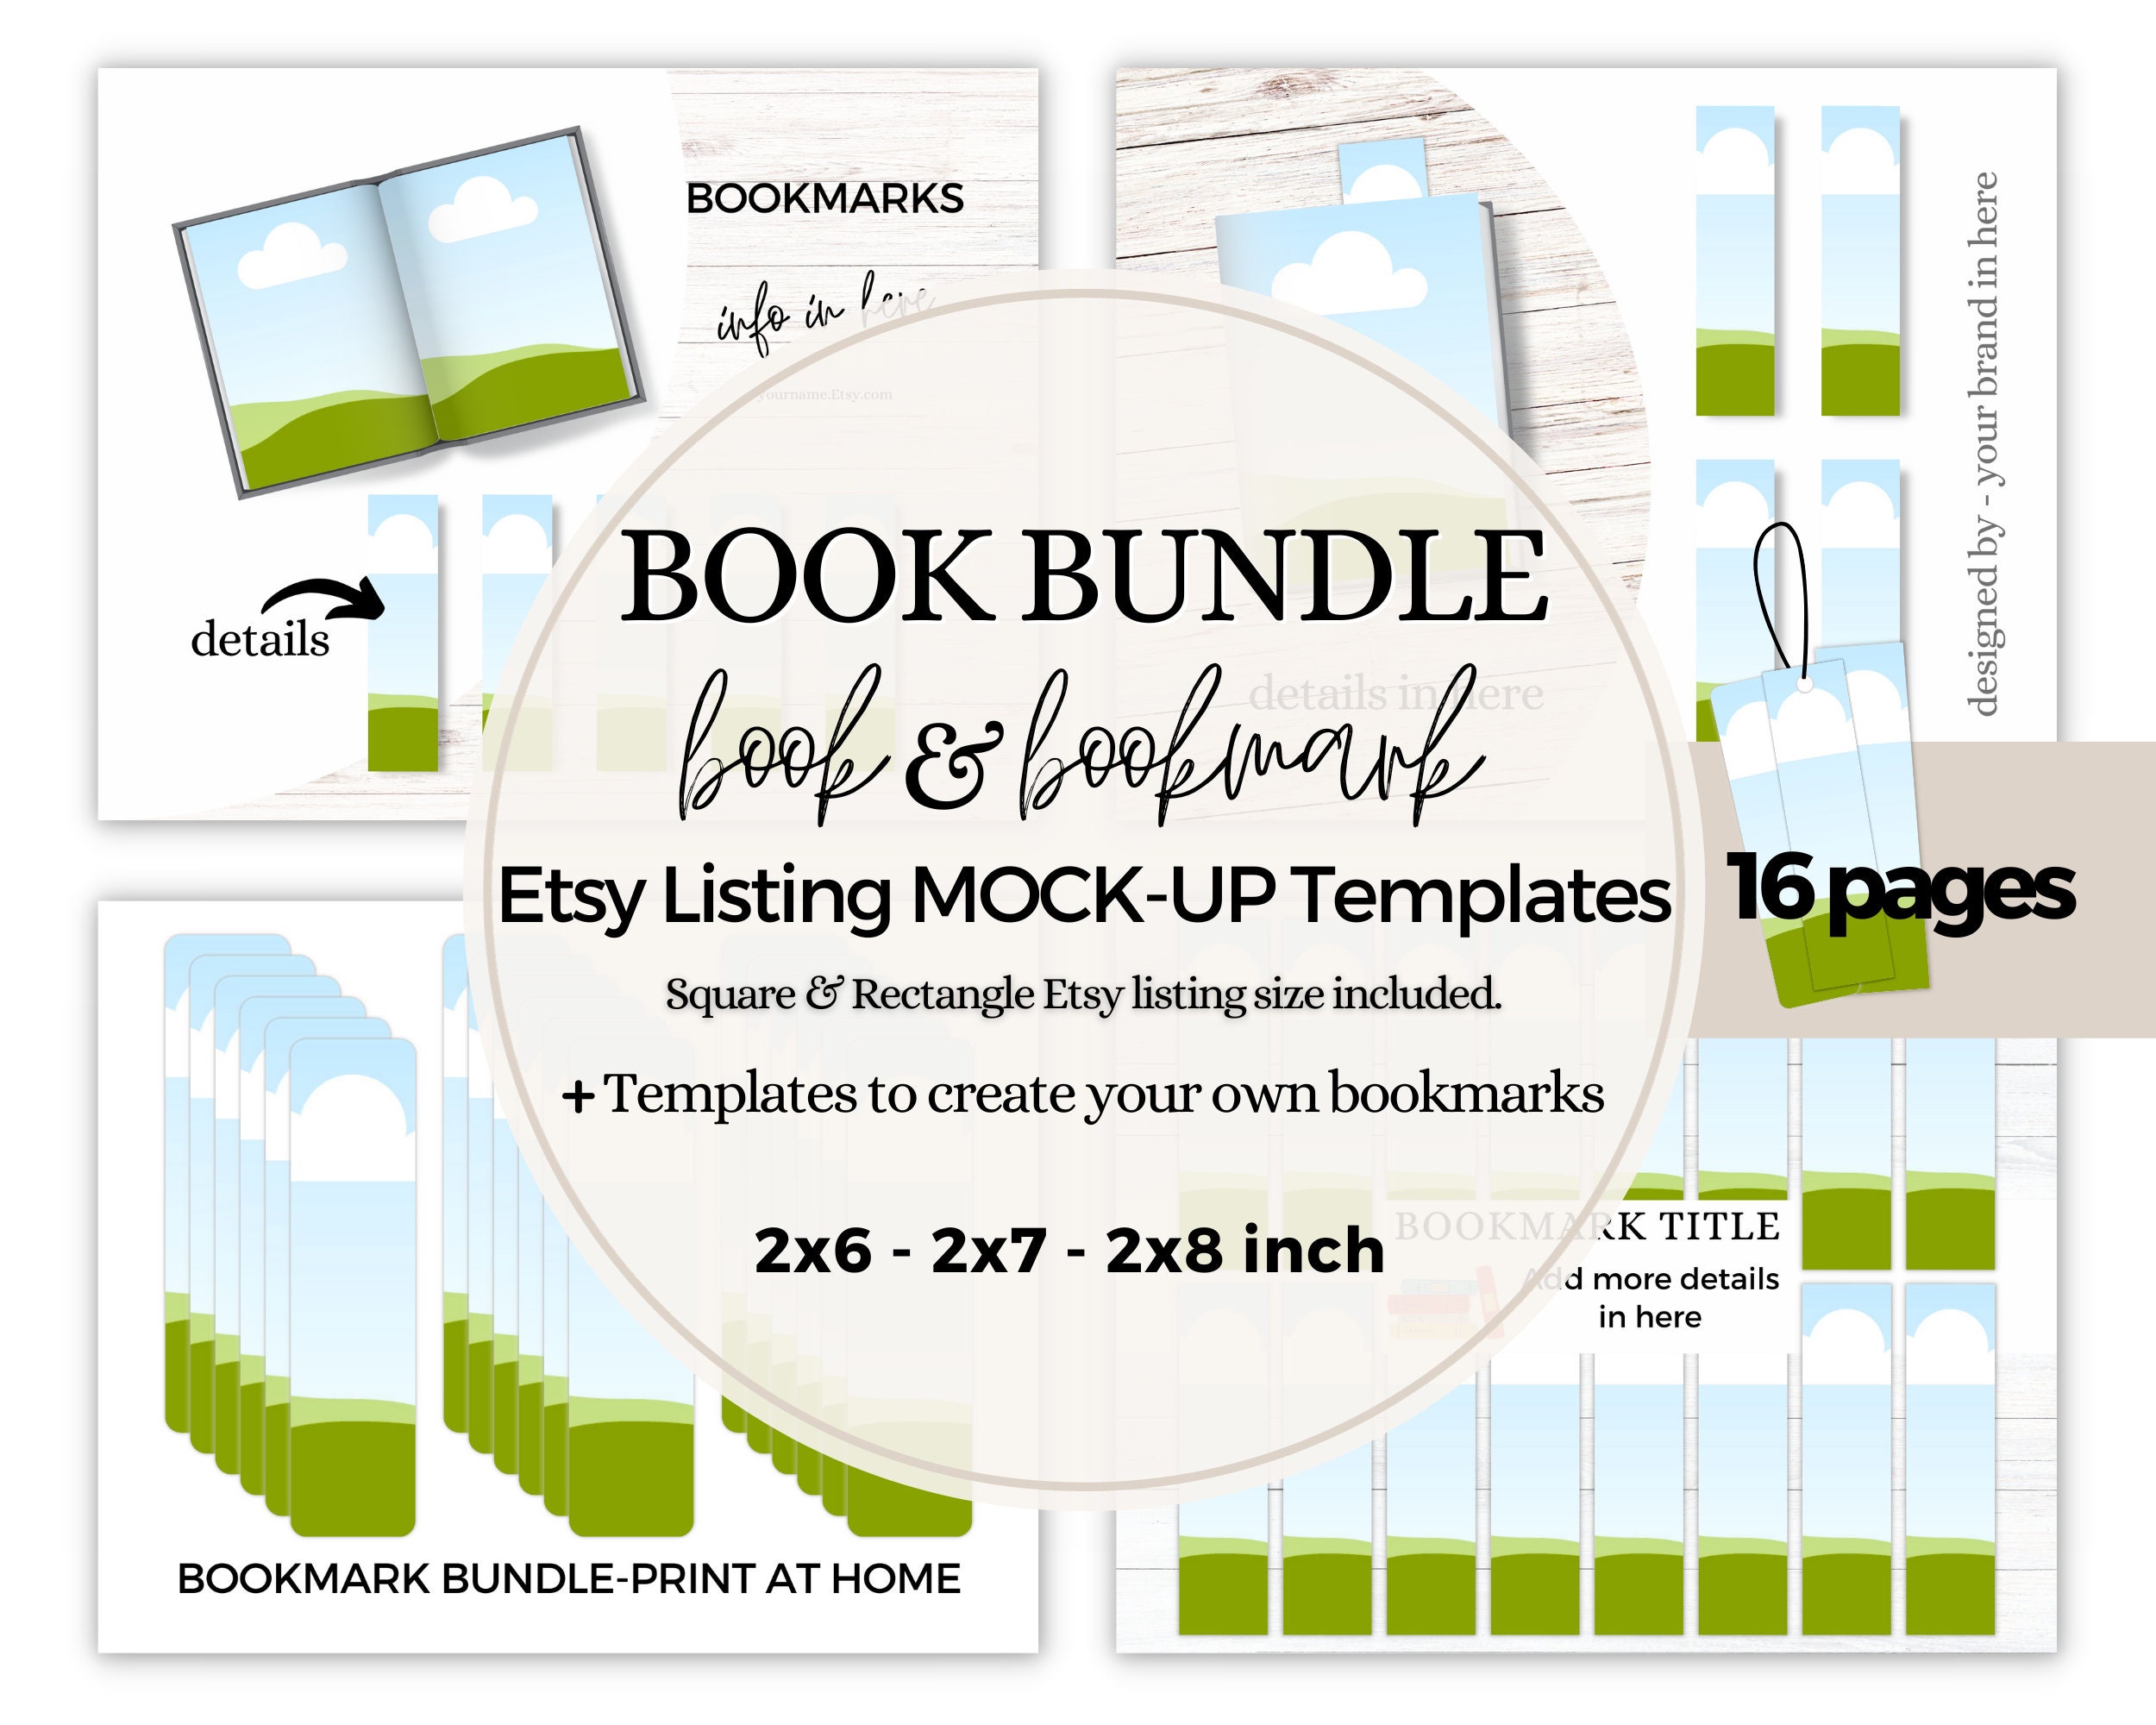 Magnetic Bookmark Holder Template, Bookmark Template SVG, Canva, DXF, Ms  Word Docx, Png, PSD, 8.5x11 Sheet, Printable (Download Now) 